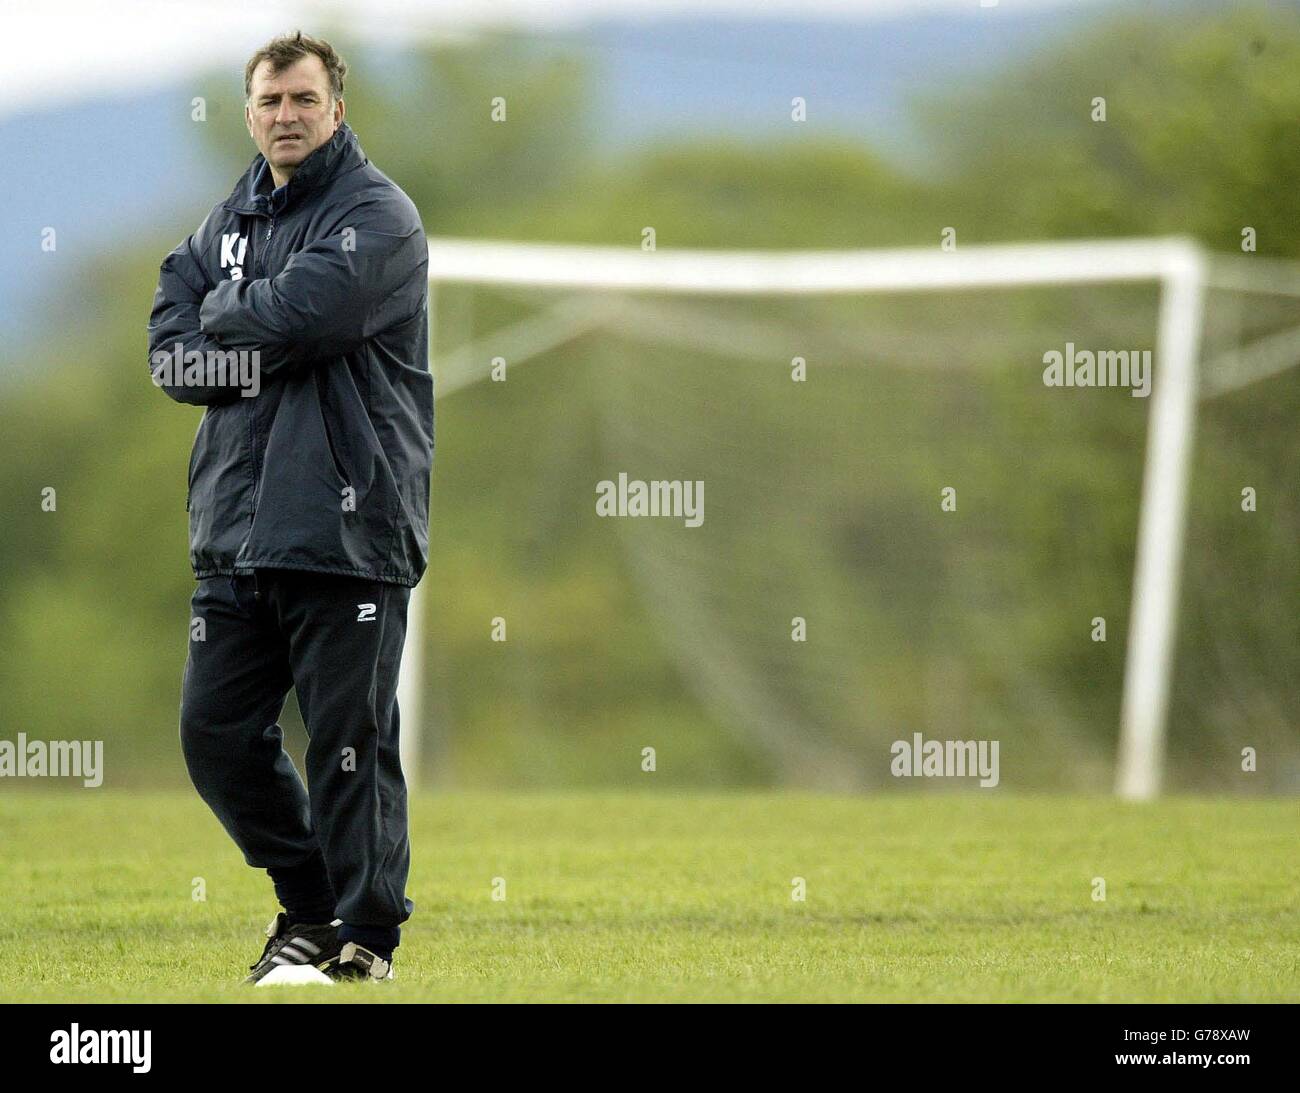 Shrewsbury Town manager Kevin Ratcliffe in deep thought during a training session in Shrewsbury, ahead of their must win Nationwide Division 3 game against Carlisle United tommorrow, as they face relegation to the conference league. . Stock Photo